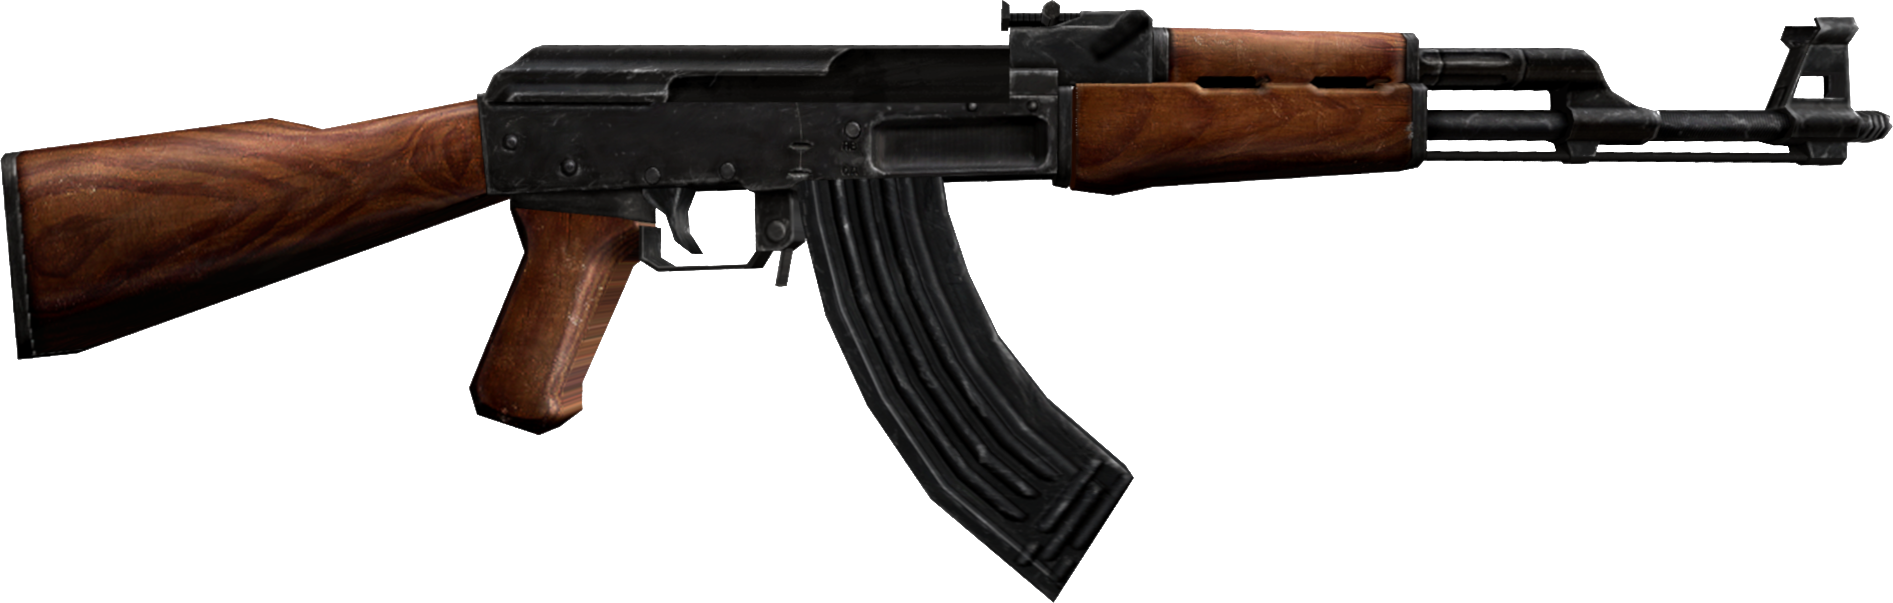 Weapon png images free. Gun clipart transparent background